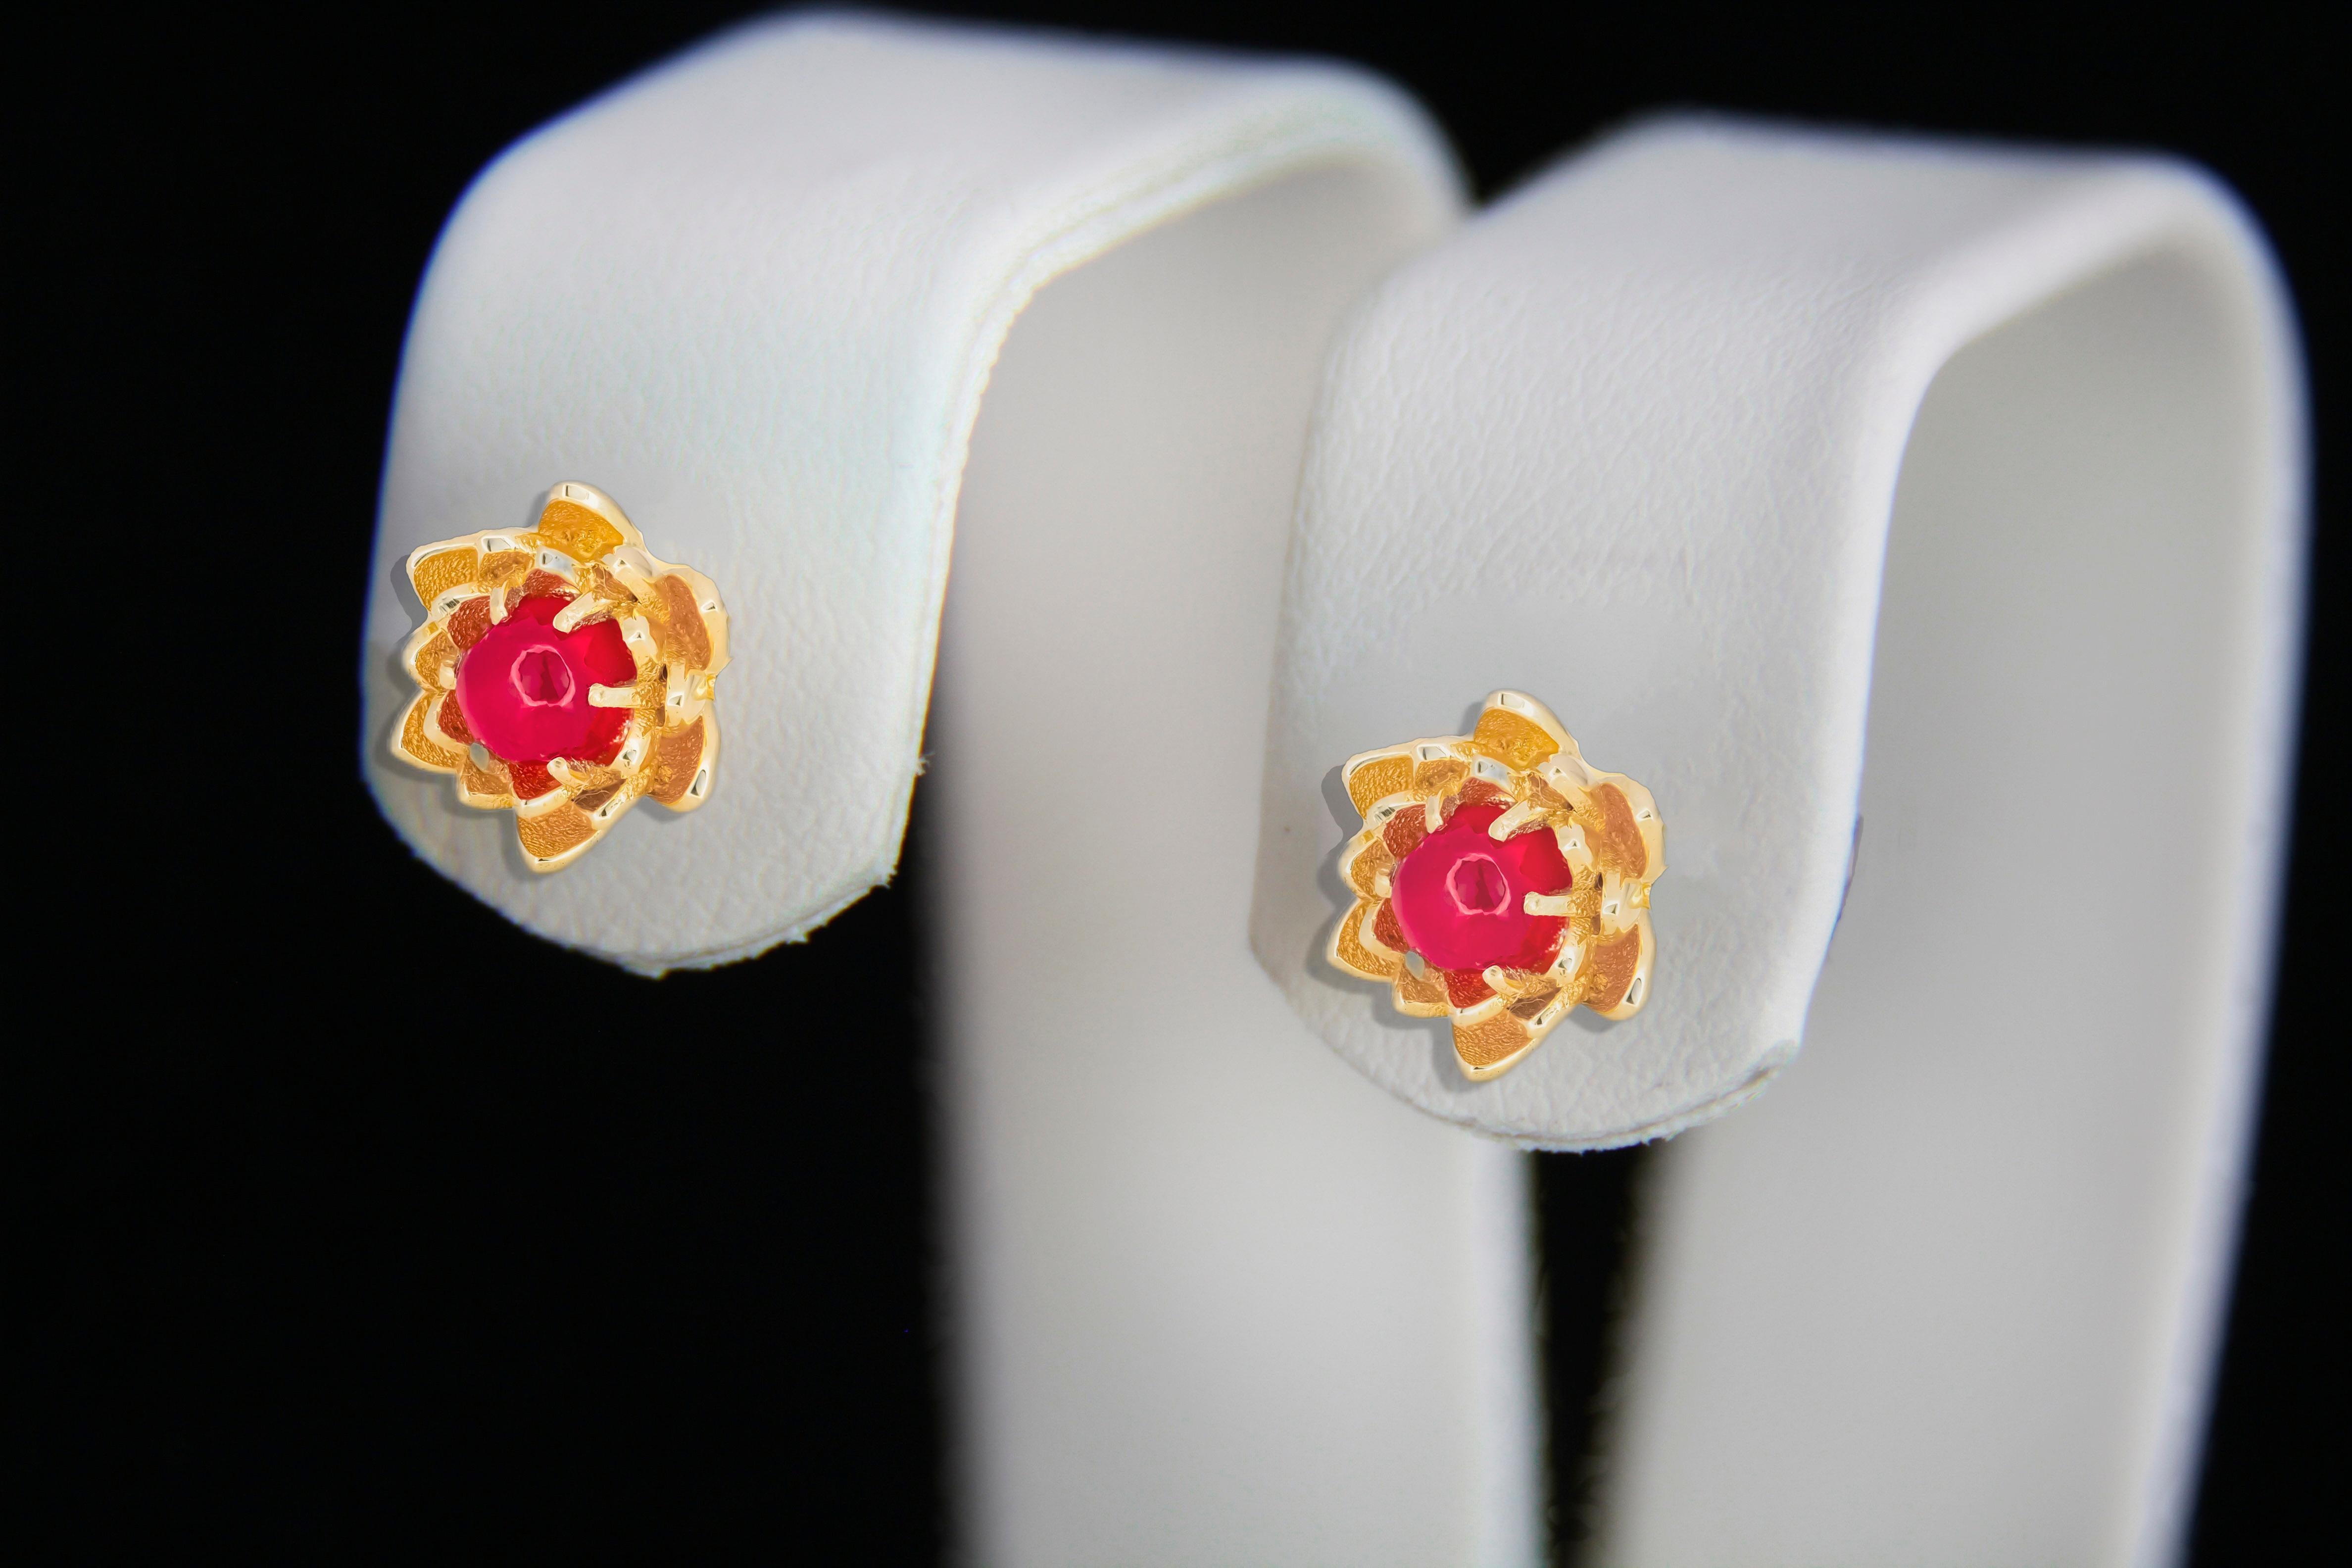 Lotus earrings studs with rubies in 14k gold. 
Ruby cabochon earrings. Ruby Gold Earrings. Flower gold earrings. Delicate ruby earrings.

Metal: 14k solid gold
Total weigh: 2.2 gr (depends from ring size)

Earrings:
Central stone: Rubies
Weight: